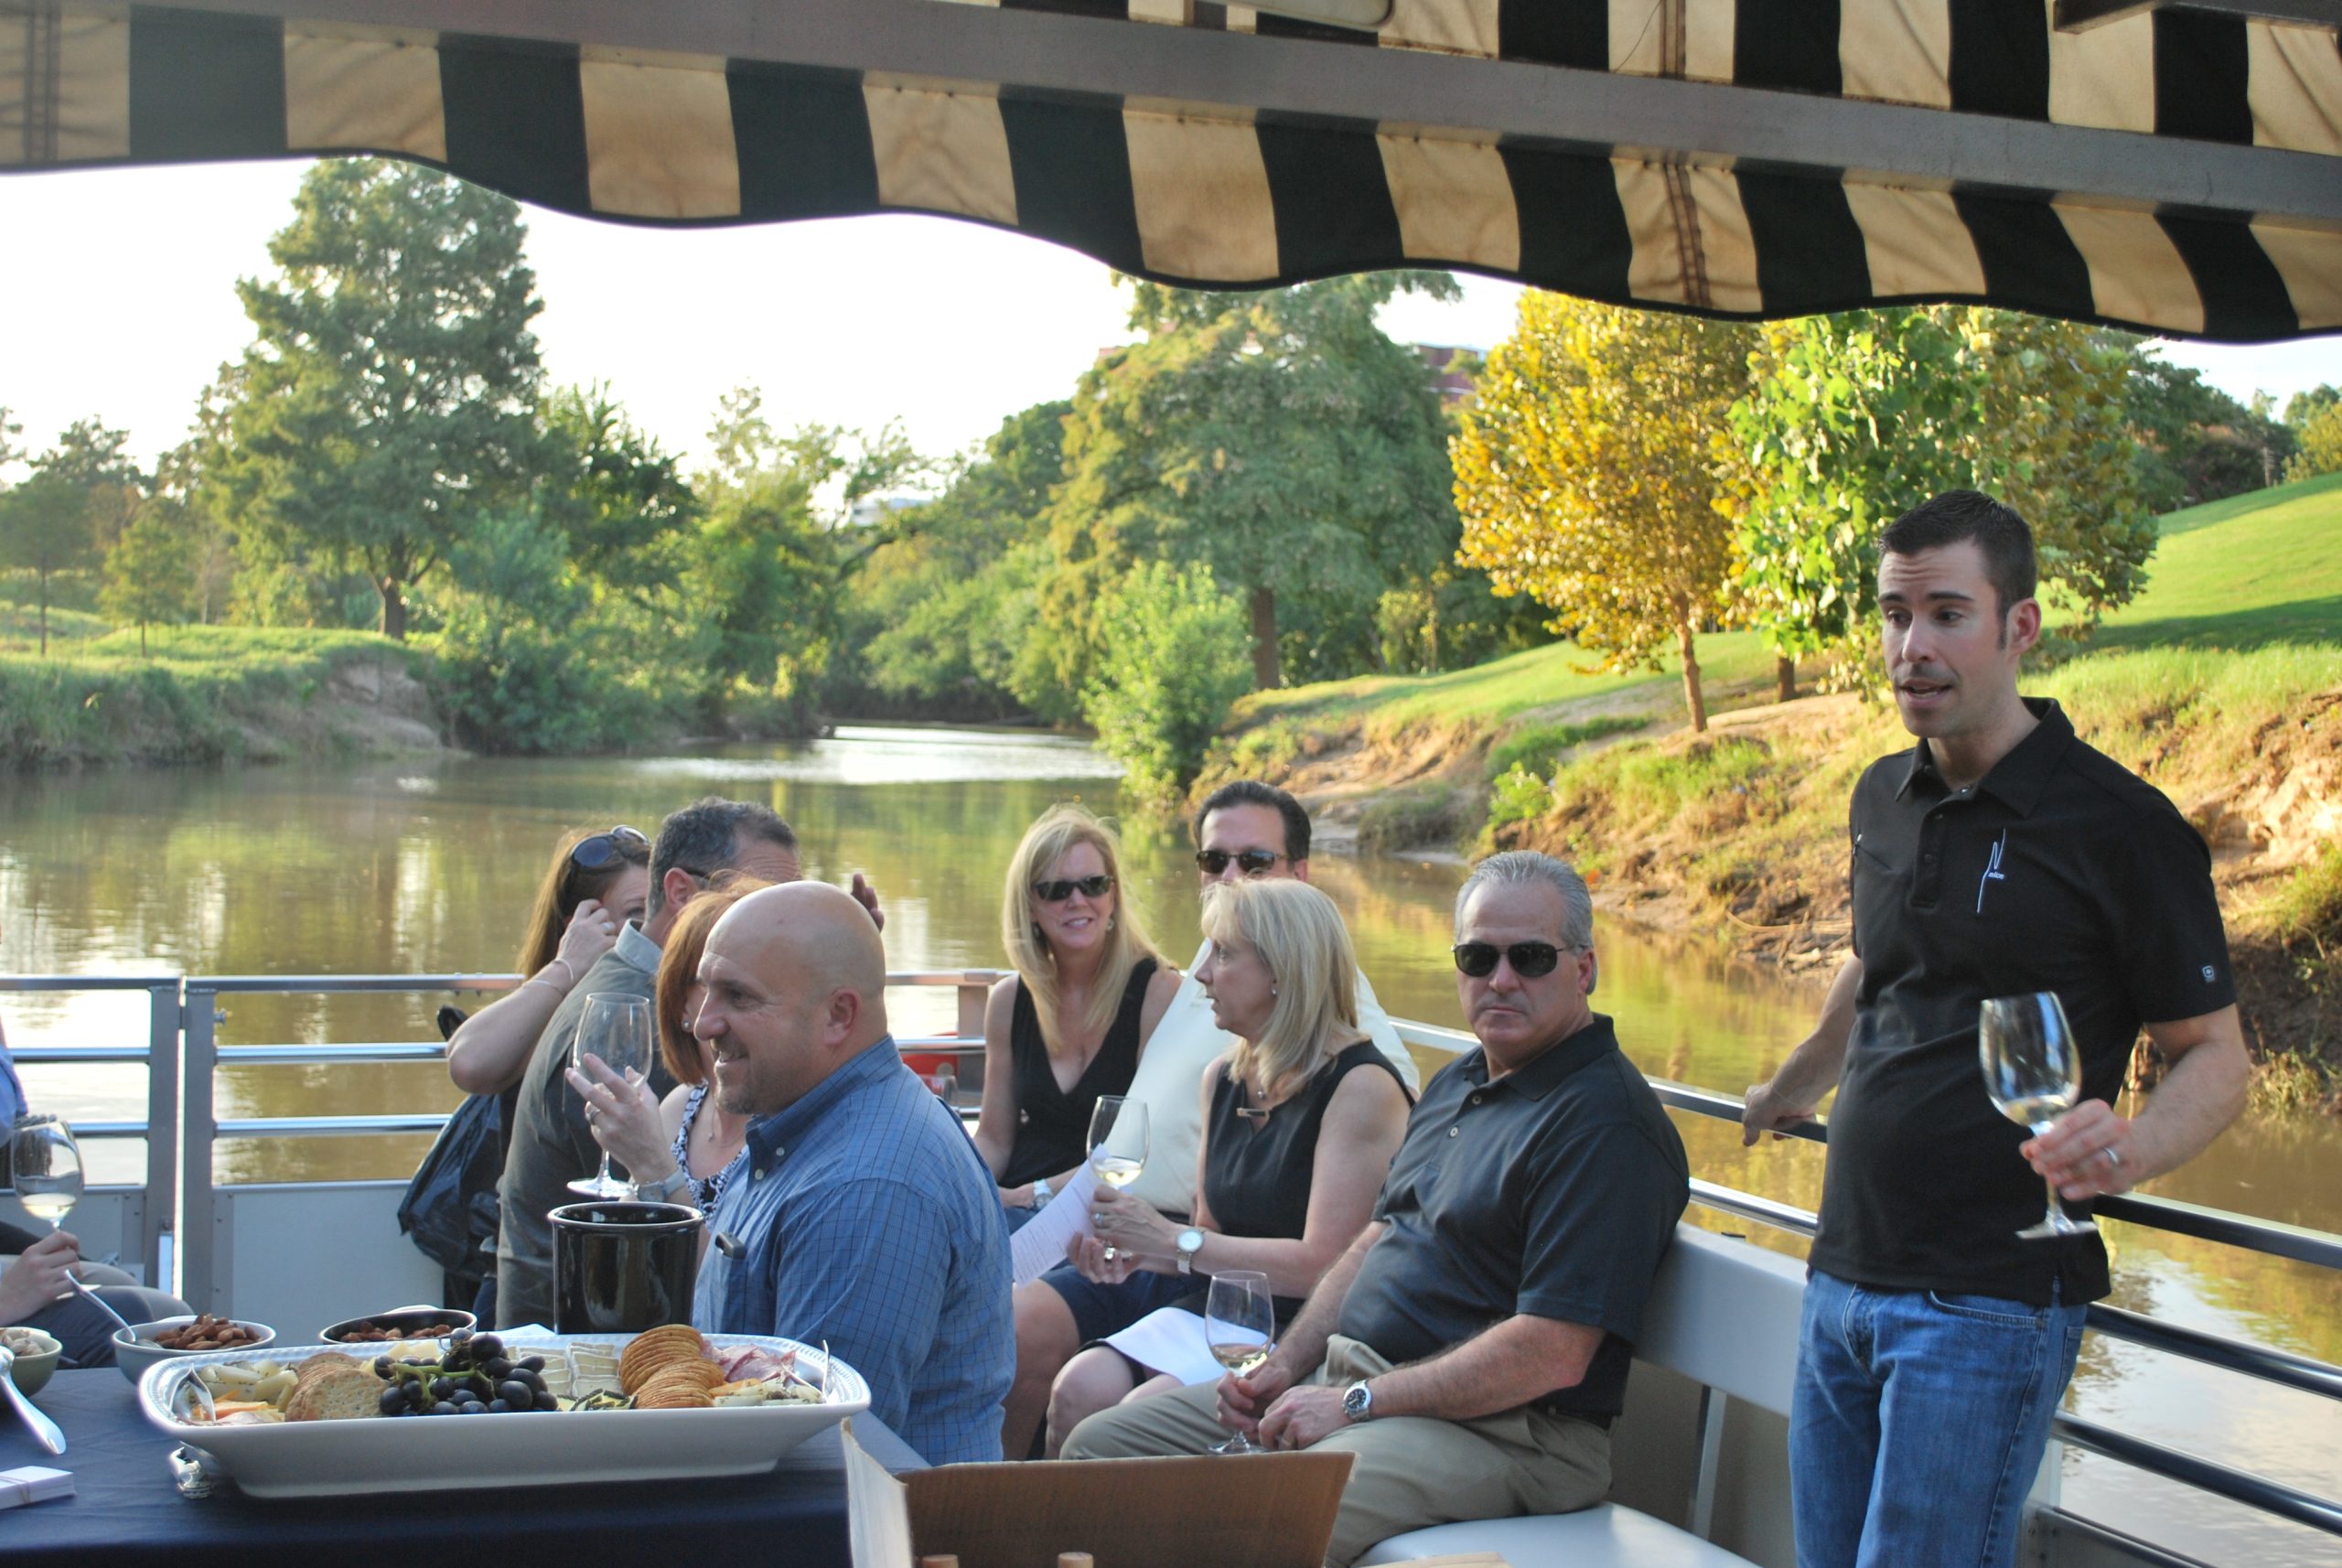 Image SOLD OUT: Wine Tasting Boat Tour with Nice Winery